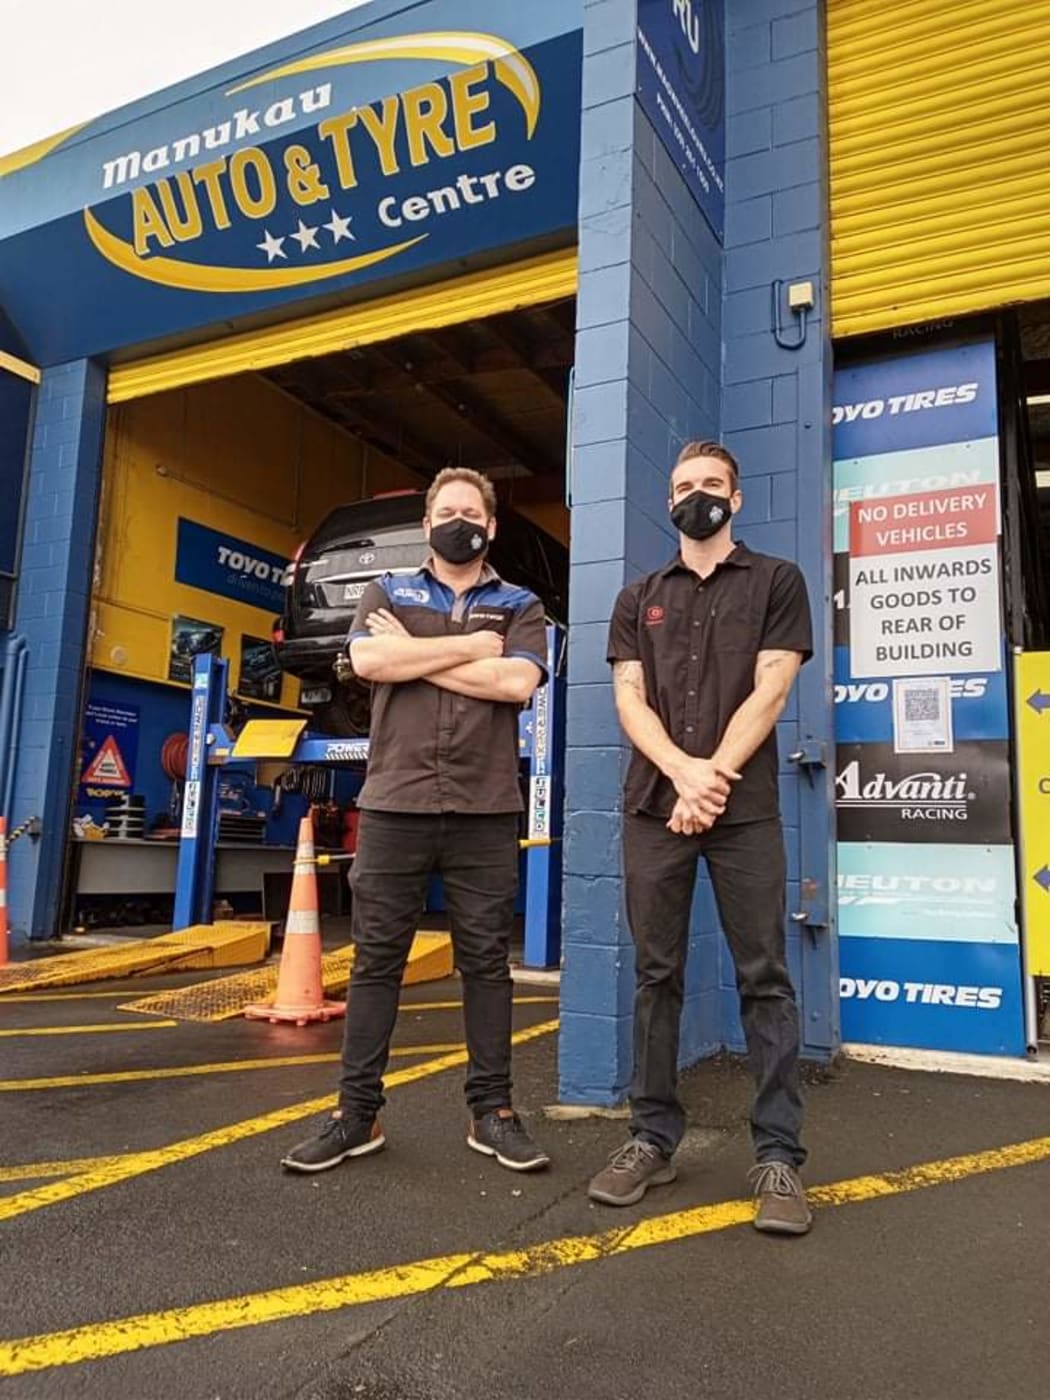 Manukau Auto and Tyre Centre is a family-run business.